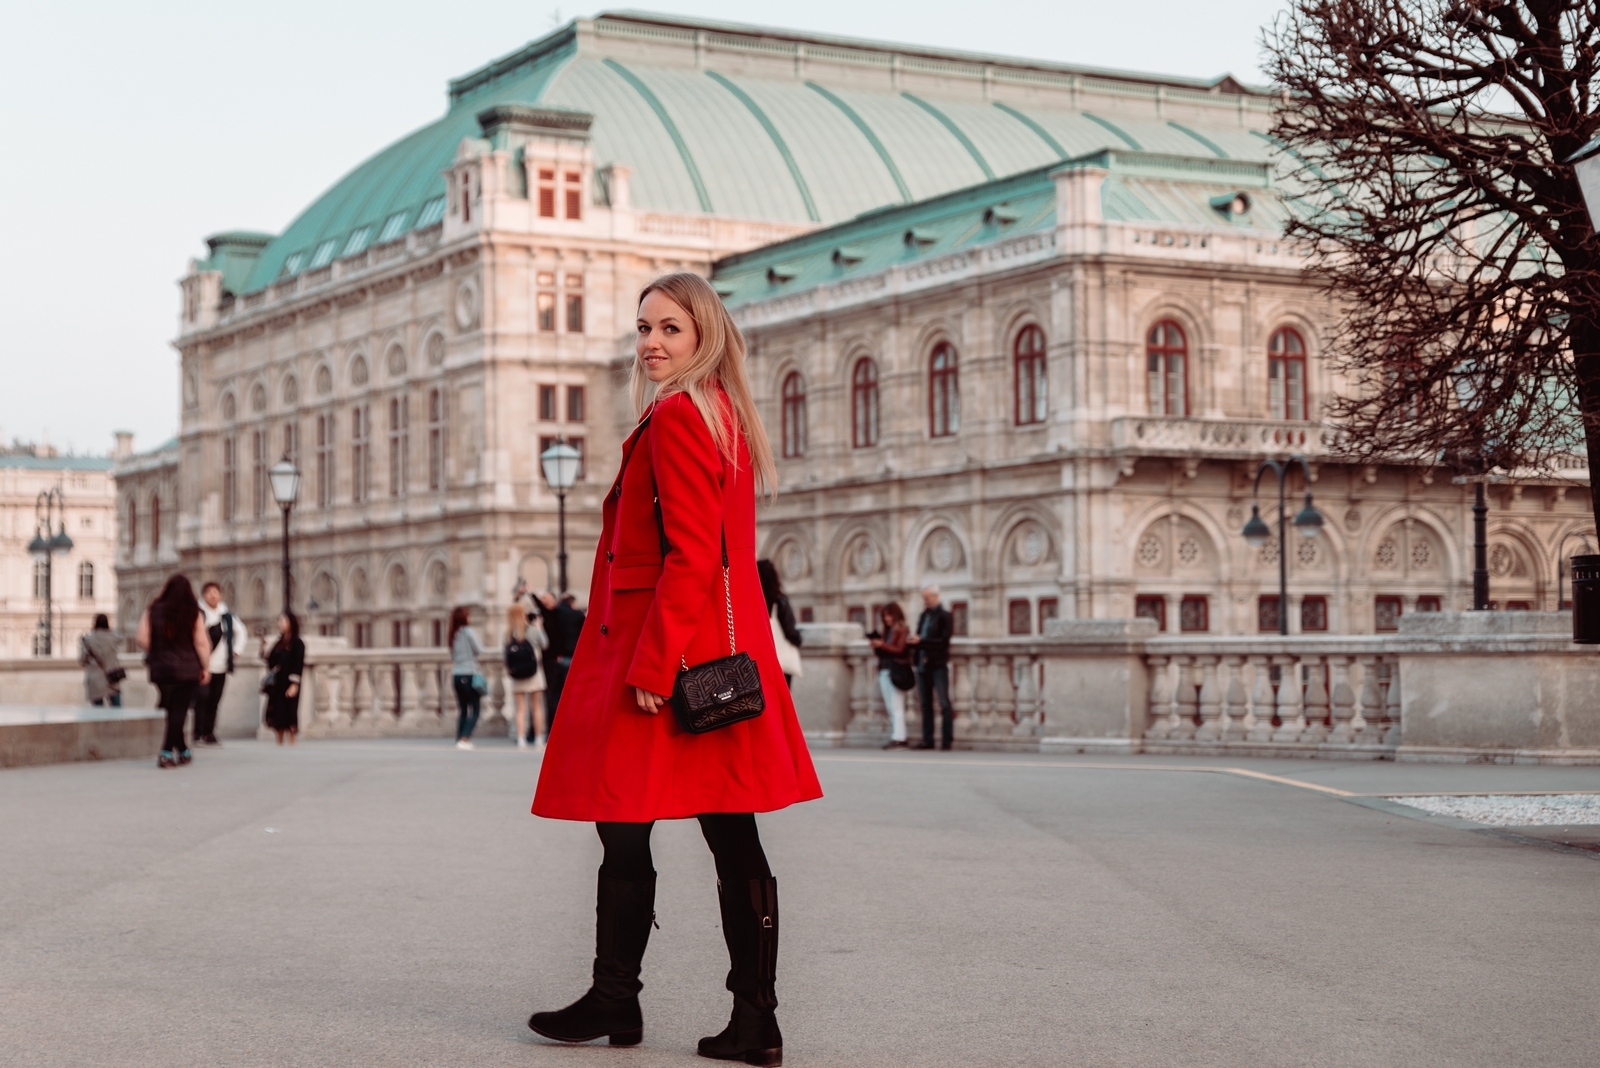 A list of top 15 most instagrammable places in Vienna, Austria